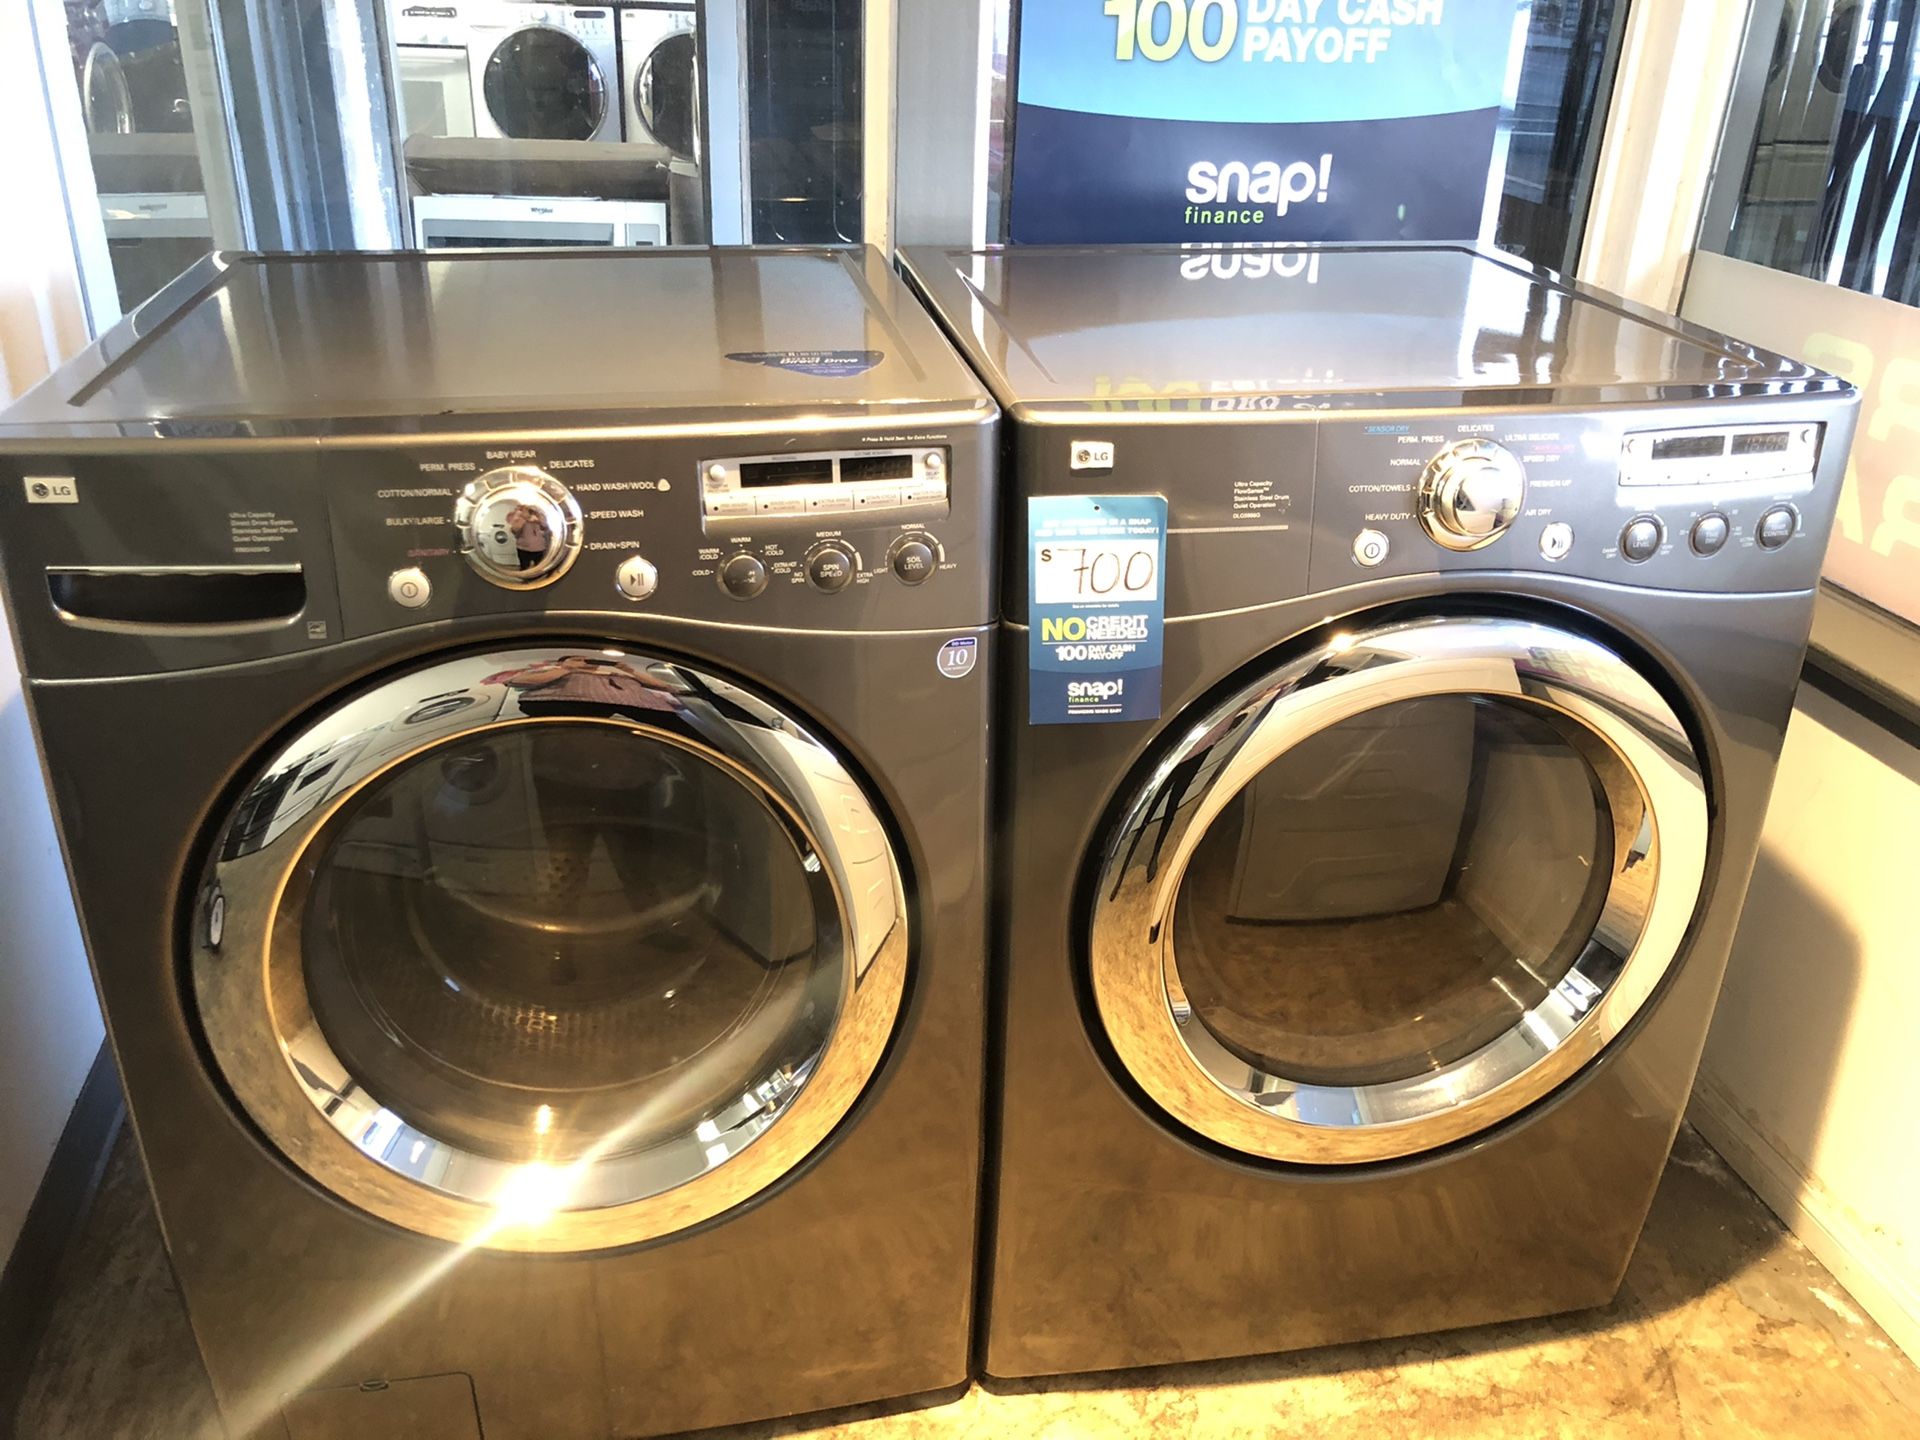 LG FRONT LOAD WASHER AND GAS DRYER SET IN GRAY COLOR